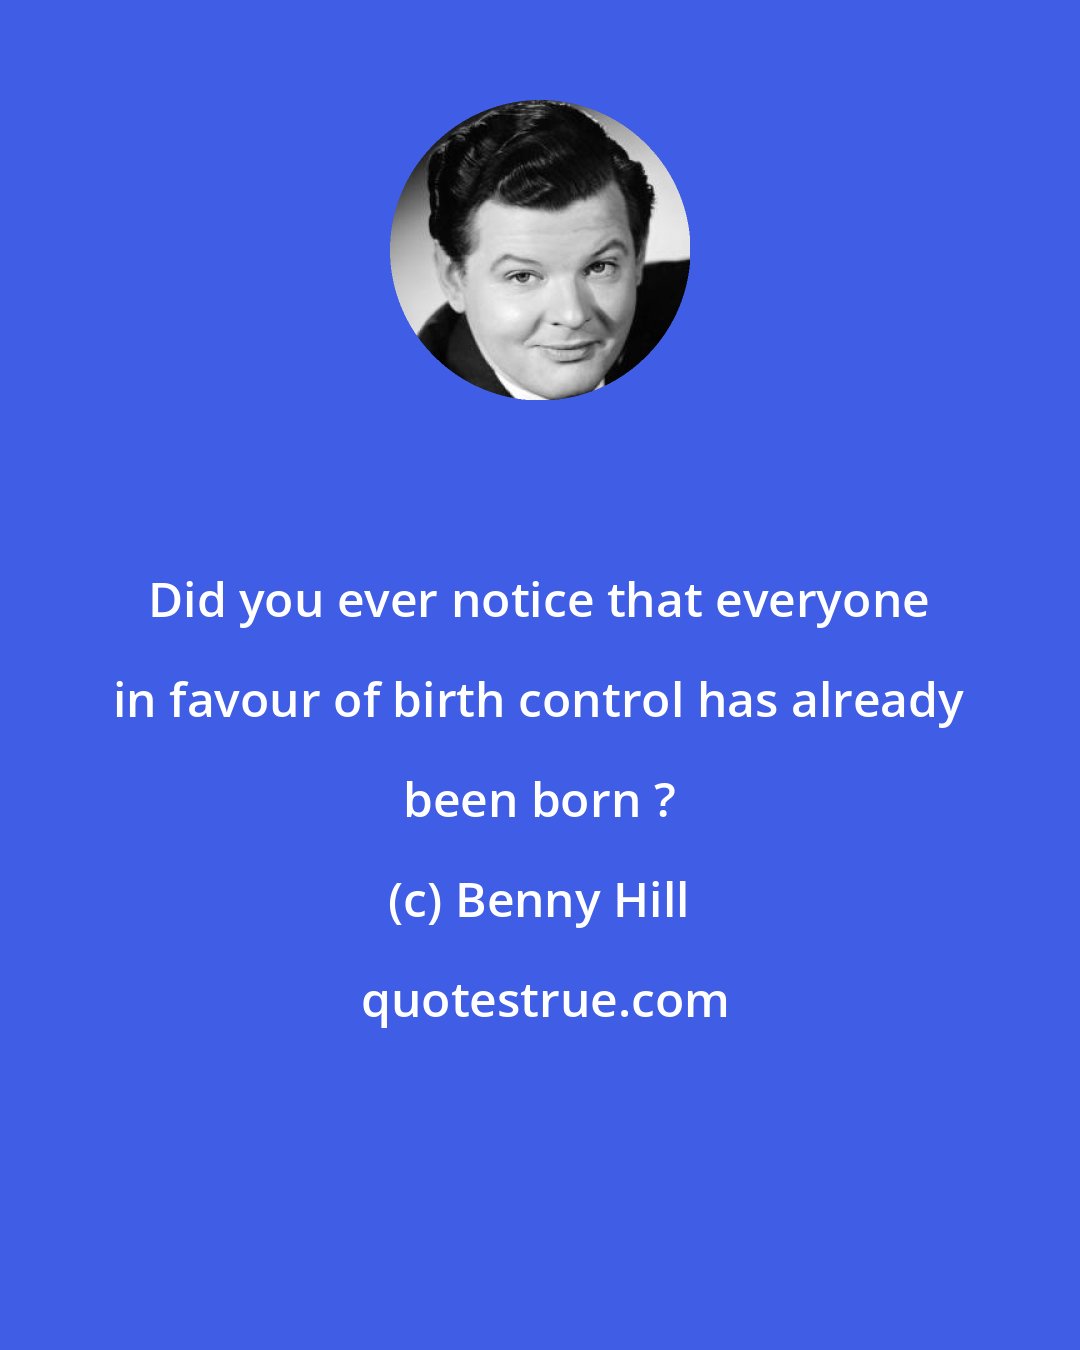 Benny Hill: Did you ever notice that everyone in favour of birth control has already been born ?